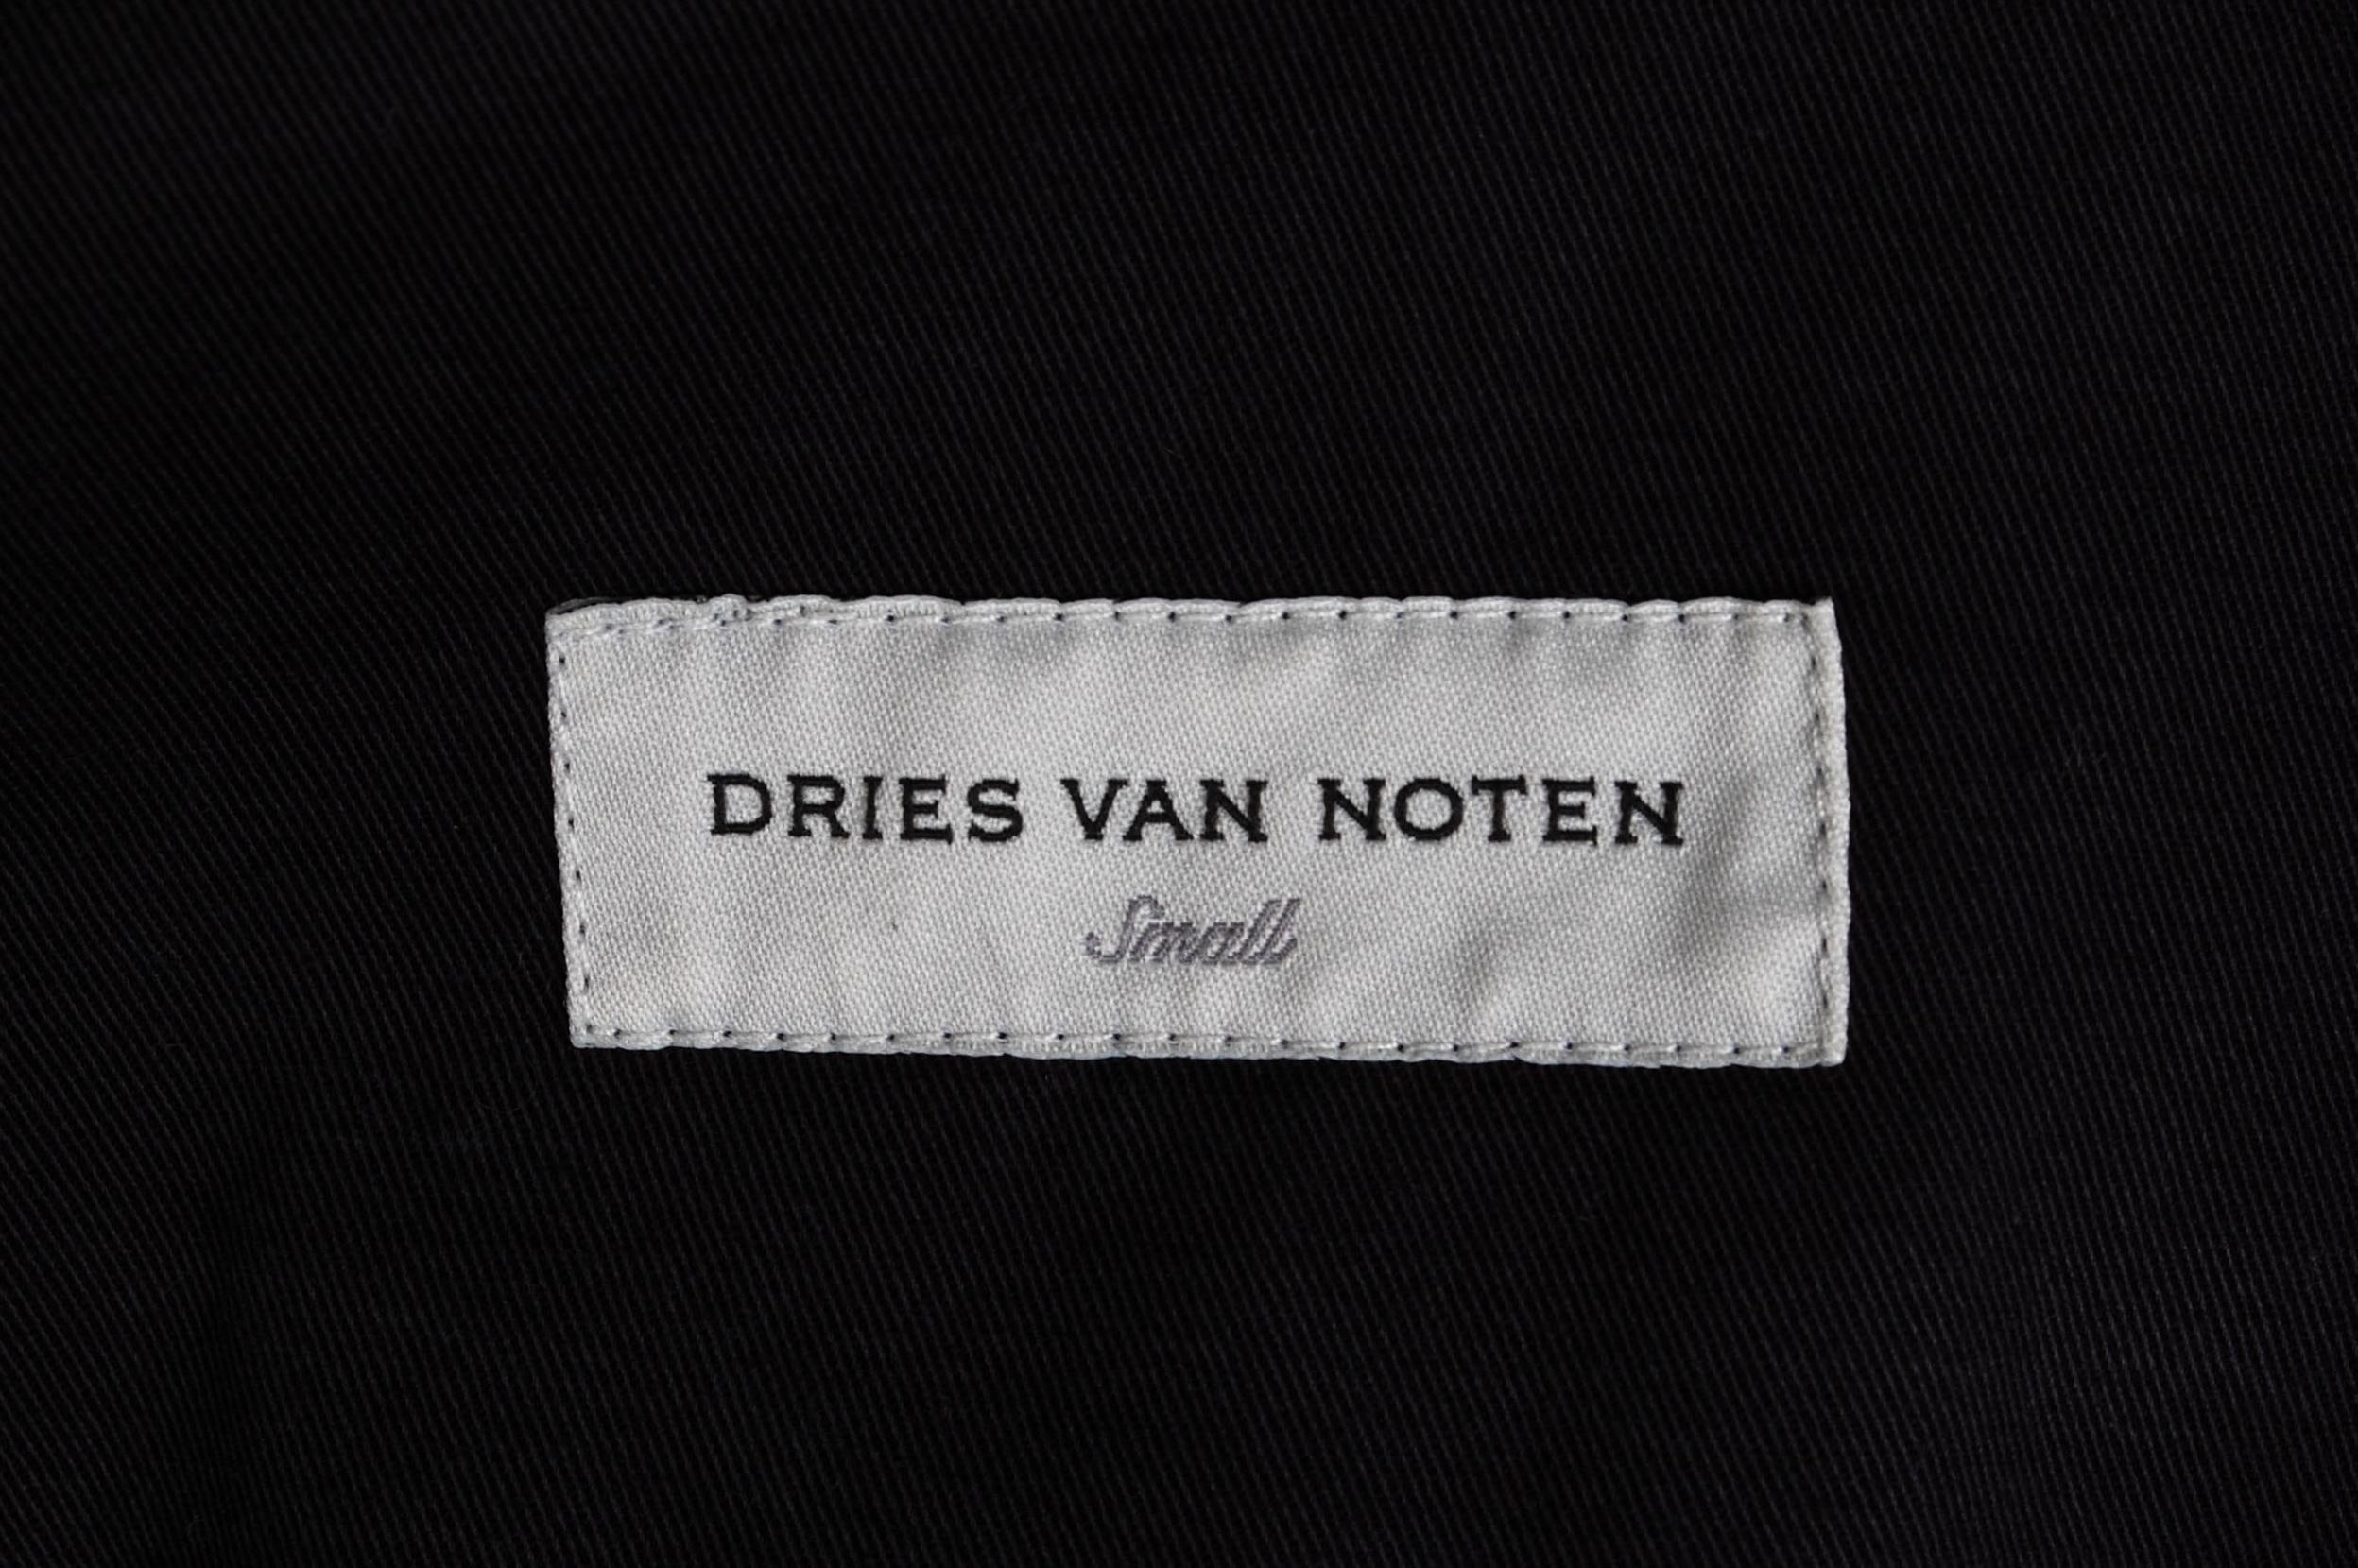 Dries Van Noten Overall Men Jacket Size S (For tall person) For Sale 1